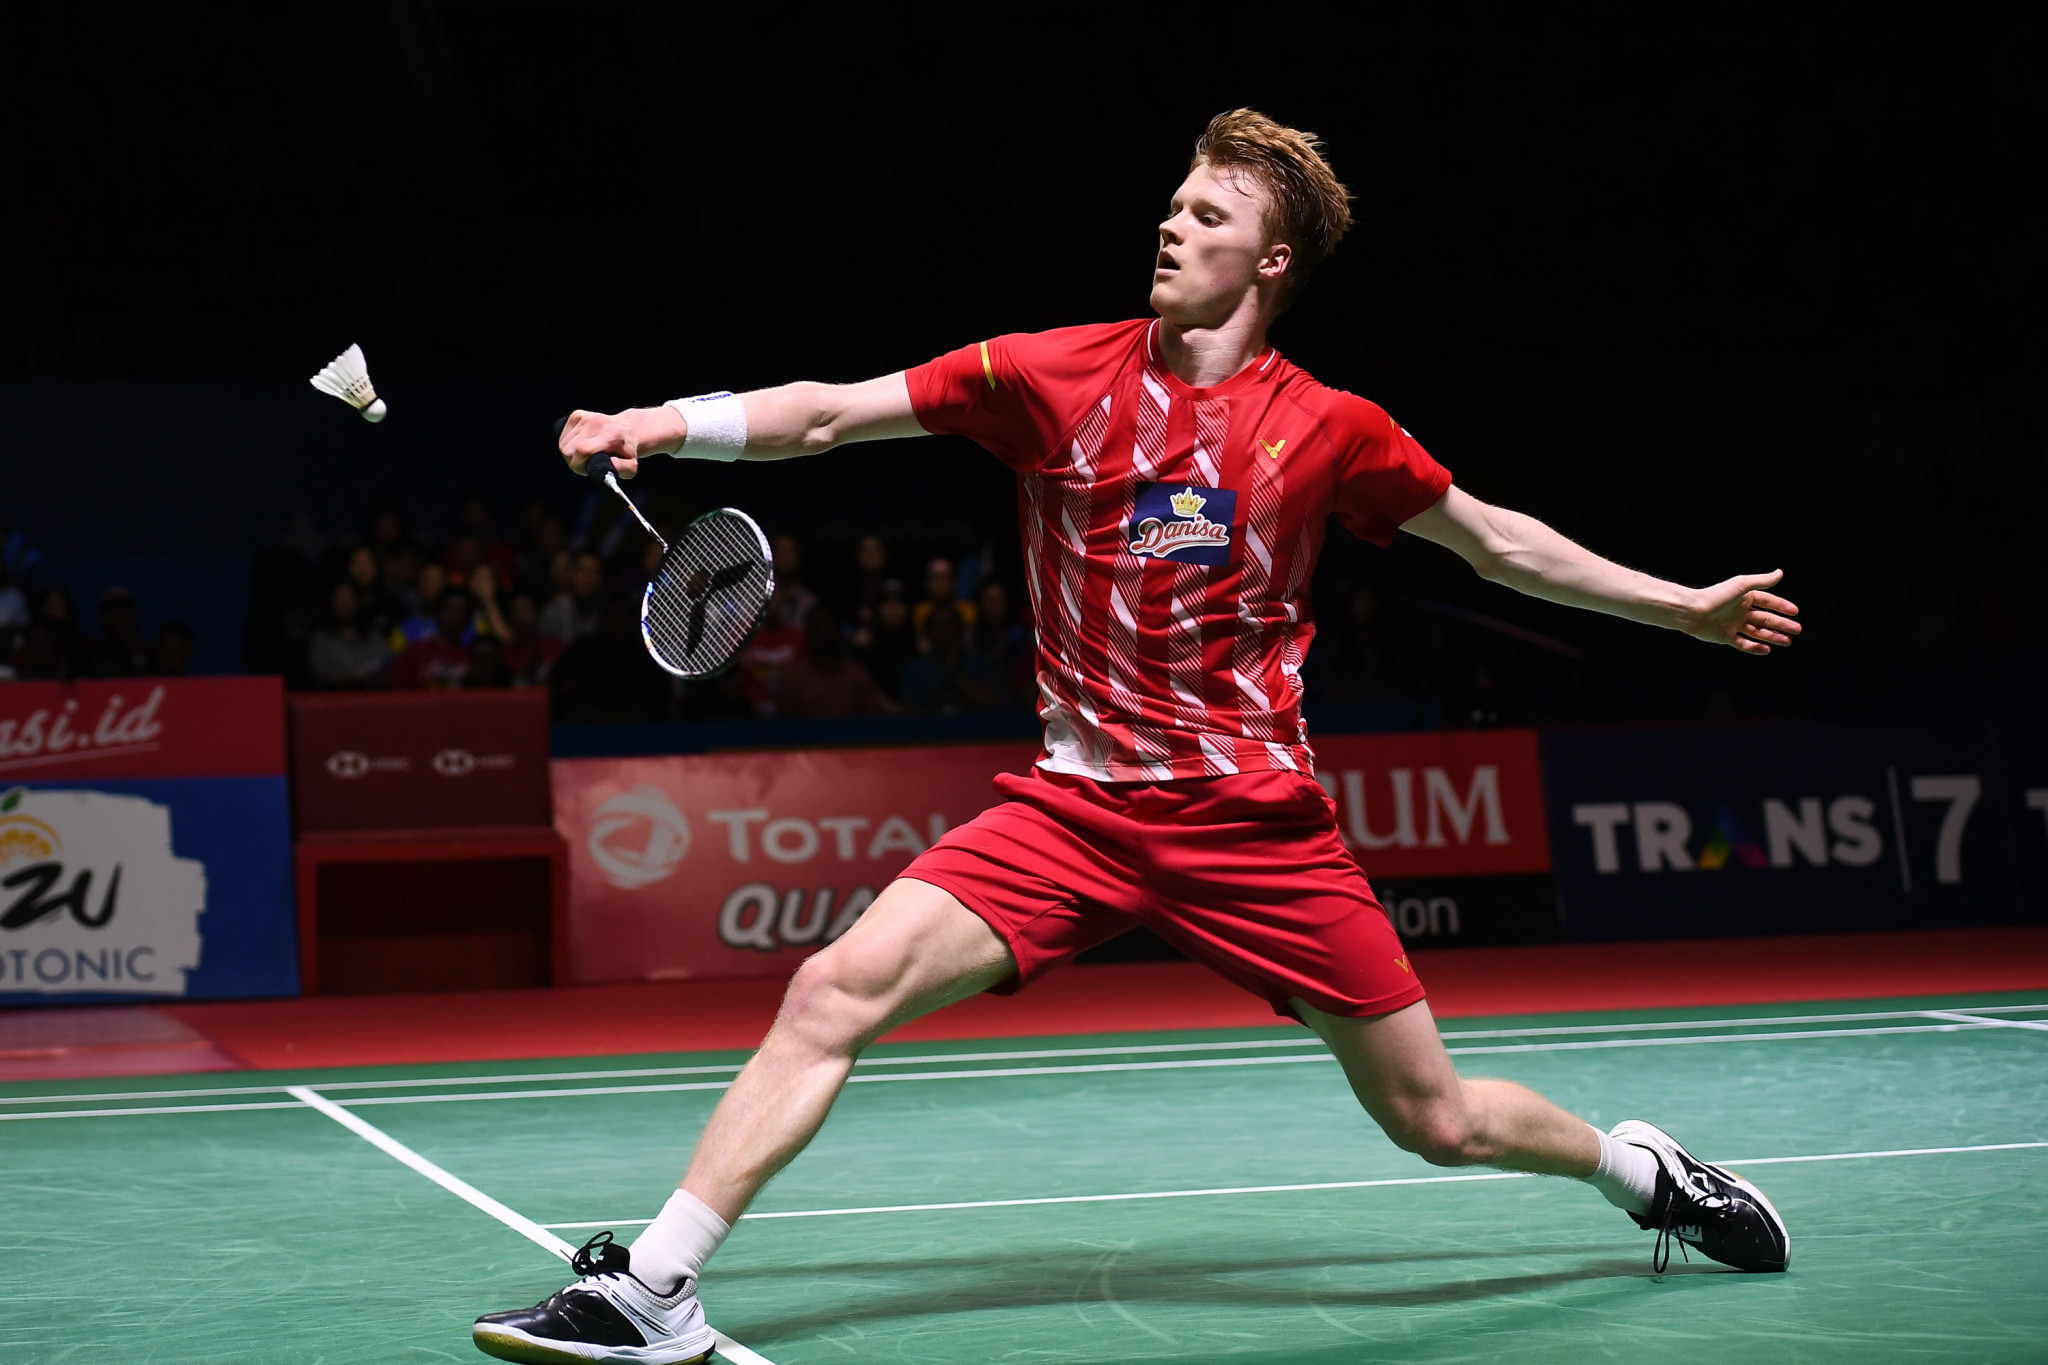 Anders Antonsen earned a shock win over fellow Dane Viktor Axelsen, the top seed, in the final of the BWF World Tour Finals in Bangkok ©Getty Images